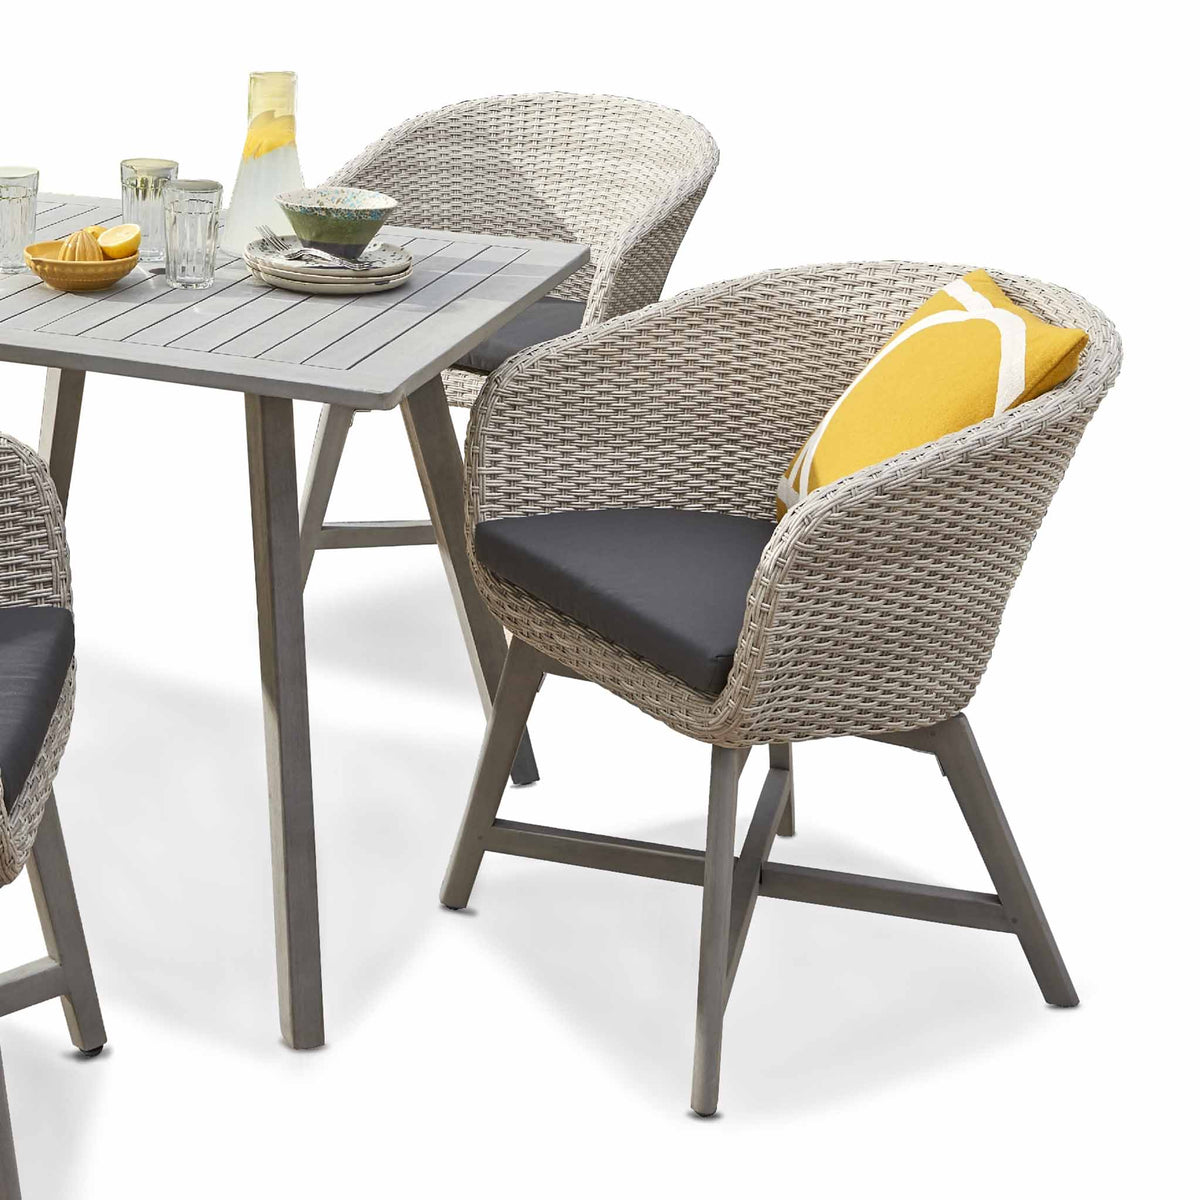 Chatsworth Rattan 4 Seat Dining Set - Close up of chair